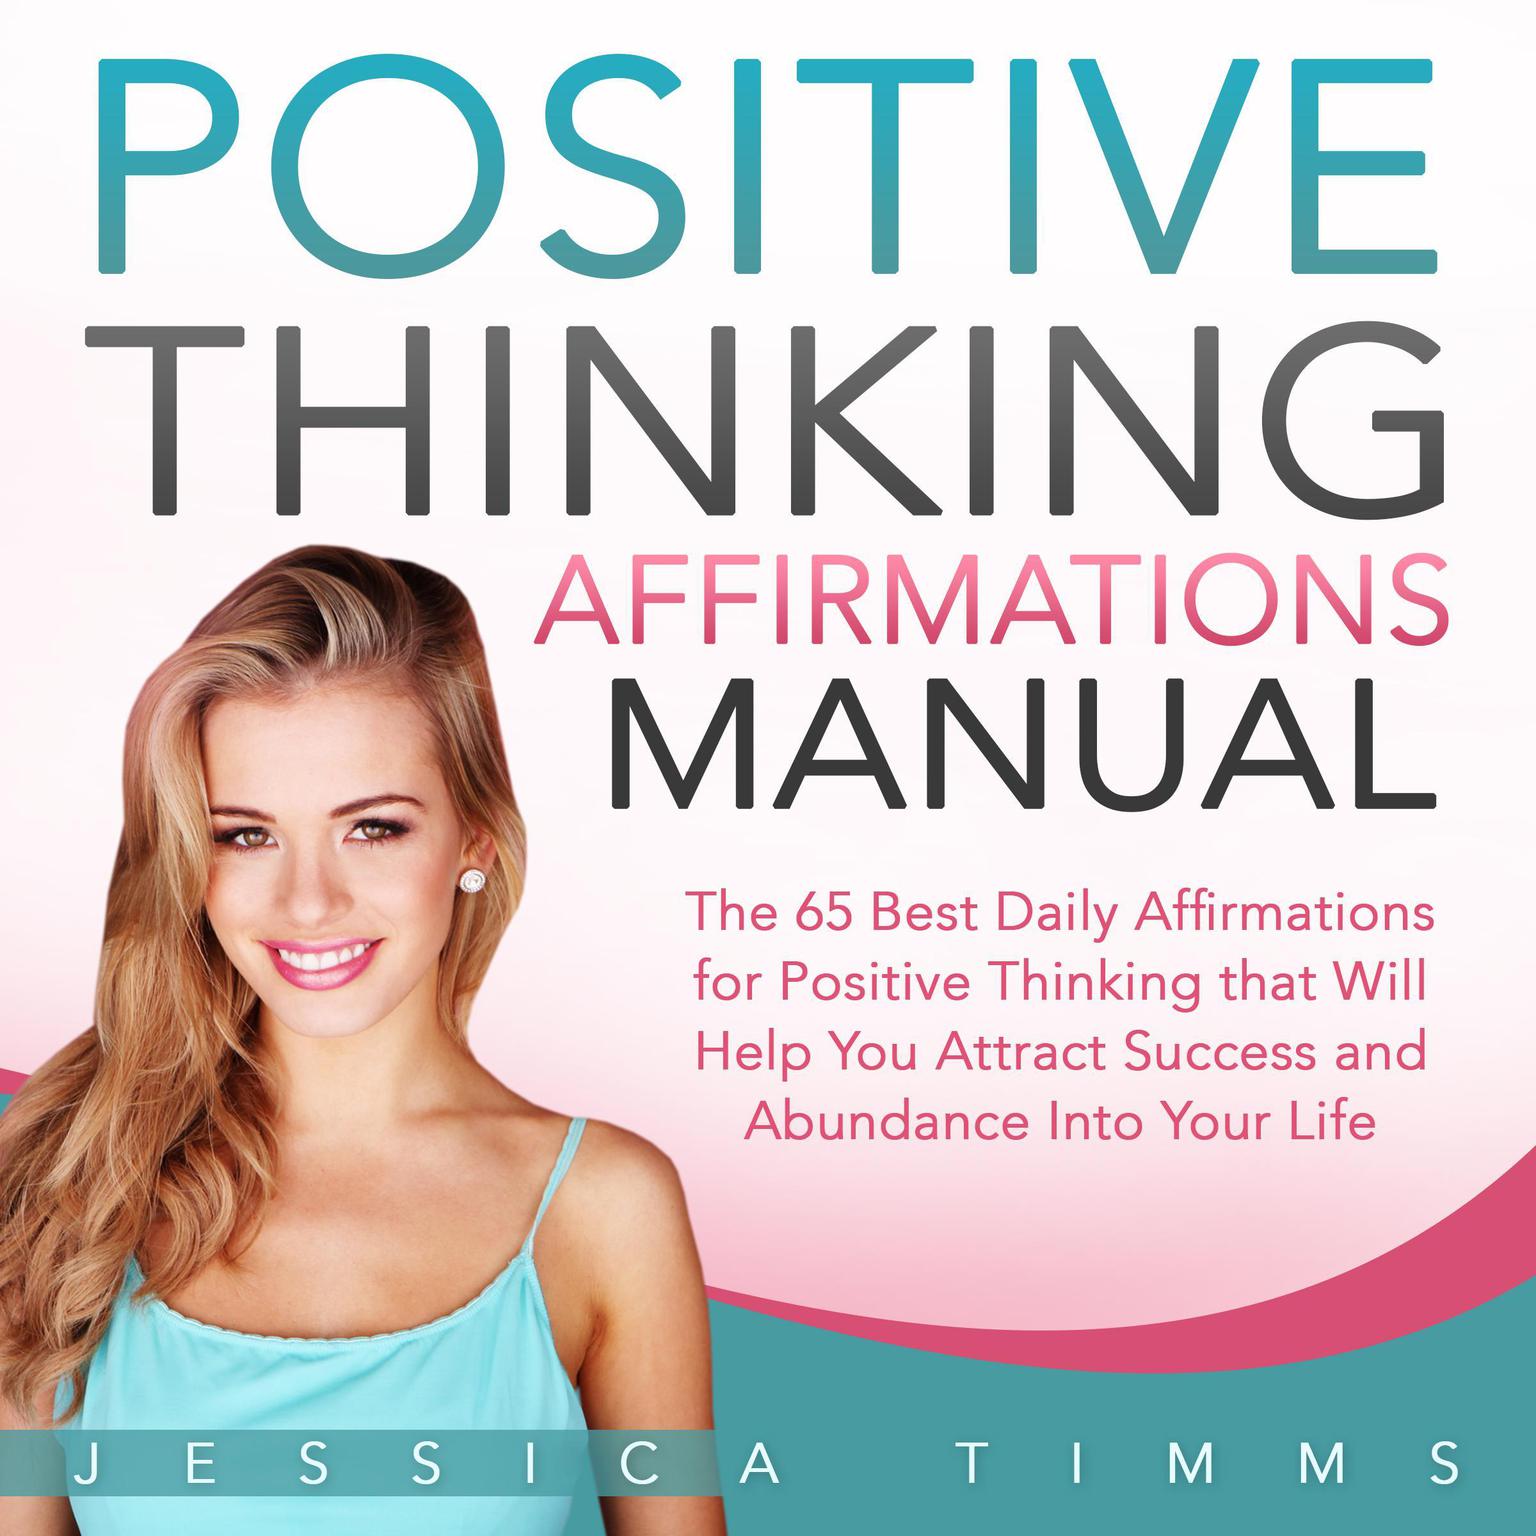 Positive Thinking Affirmations Manual: The 65 Best Daily Affirmations for Positive Thinking that Will Help You Attract Success and Abundance into Your Life: The 65 Best Daily Affirmations for Positive Thinking that Will Help You Attract Success and Abundance into Your Life Audiobook, by Jessica Timms